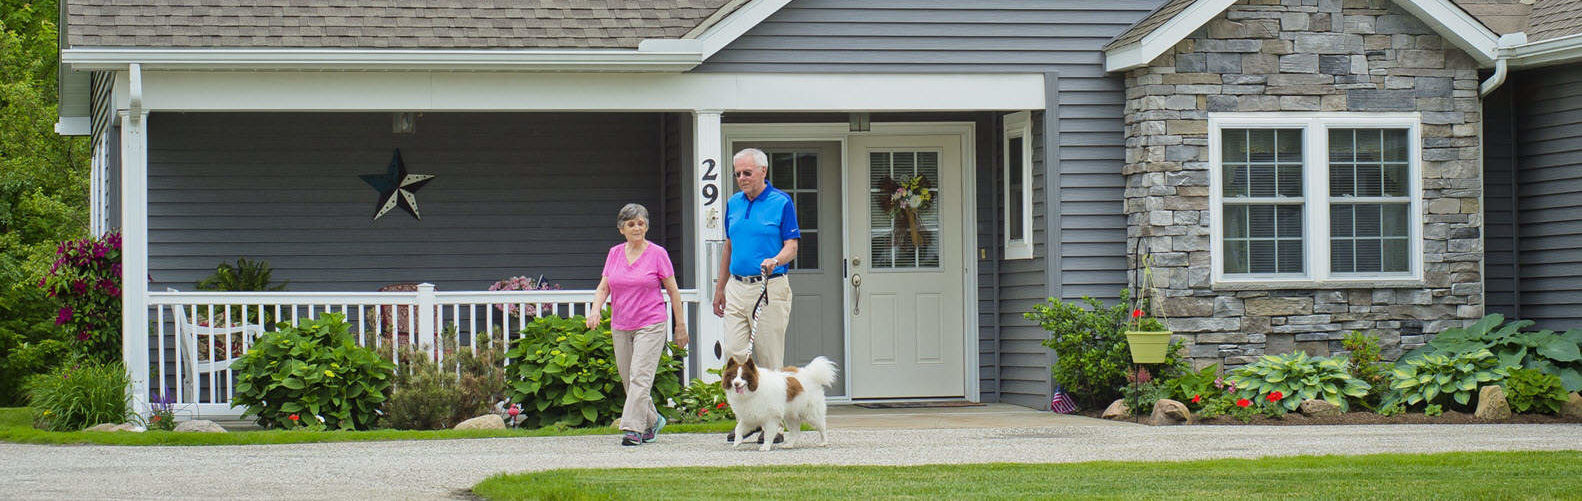 residents walking their dog outside of the garden homes